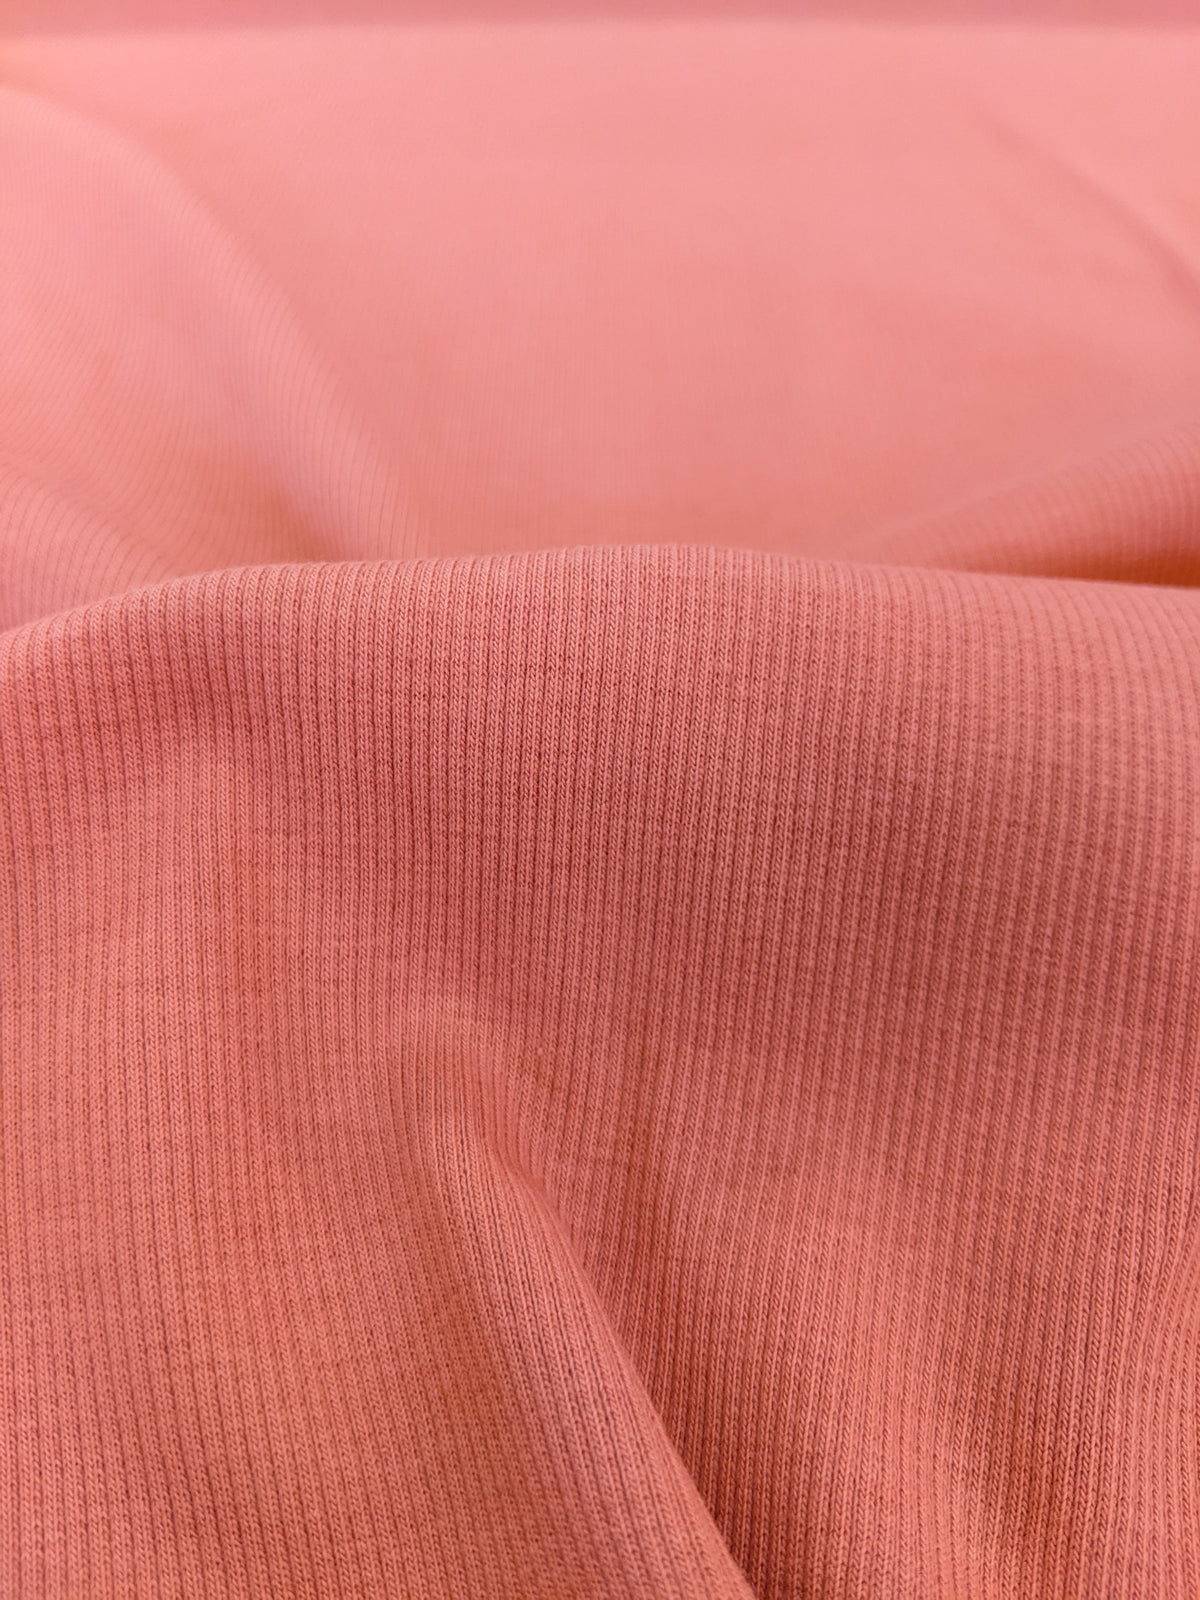 Remnant: Cotton Jersey Rib Knit - Family Fabrics Coordinate - Canyon Clay (.95 metres)